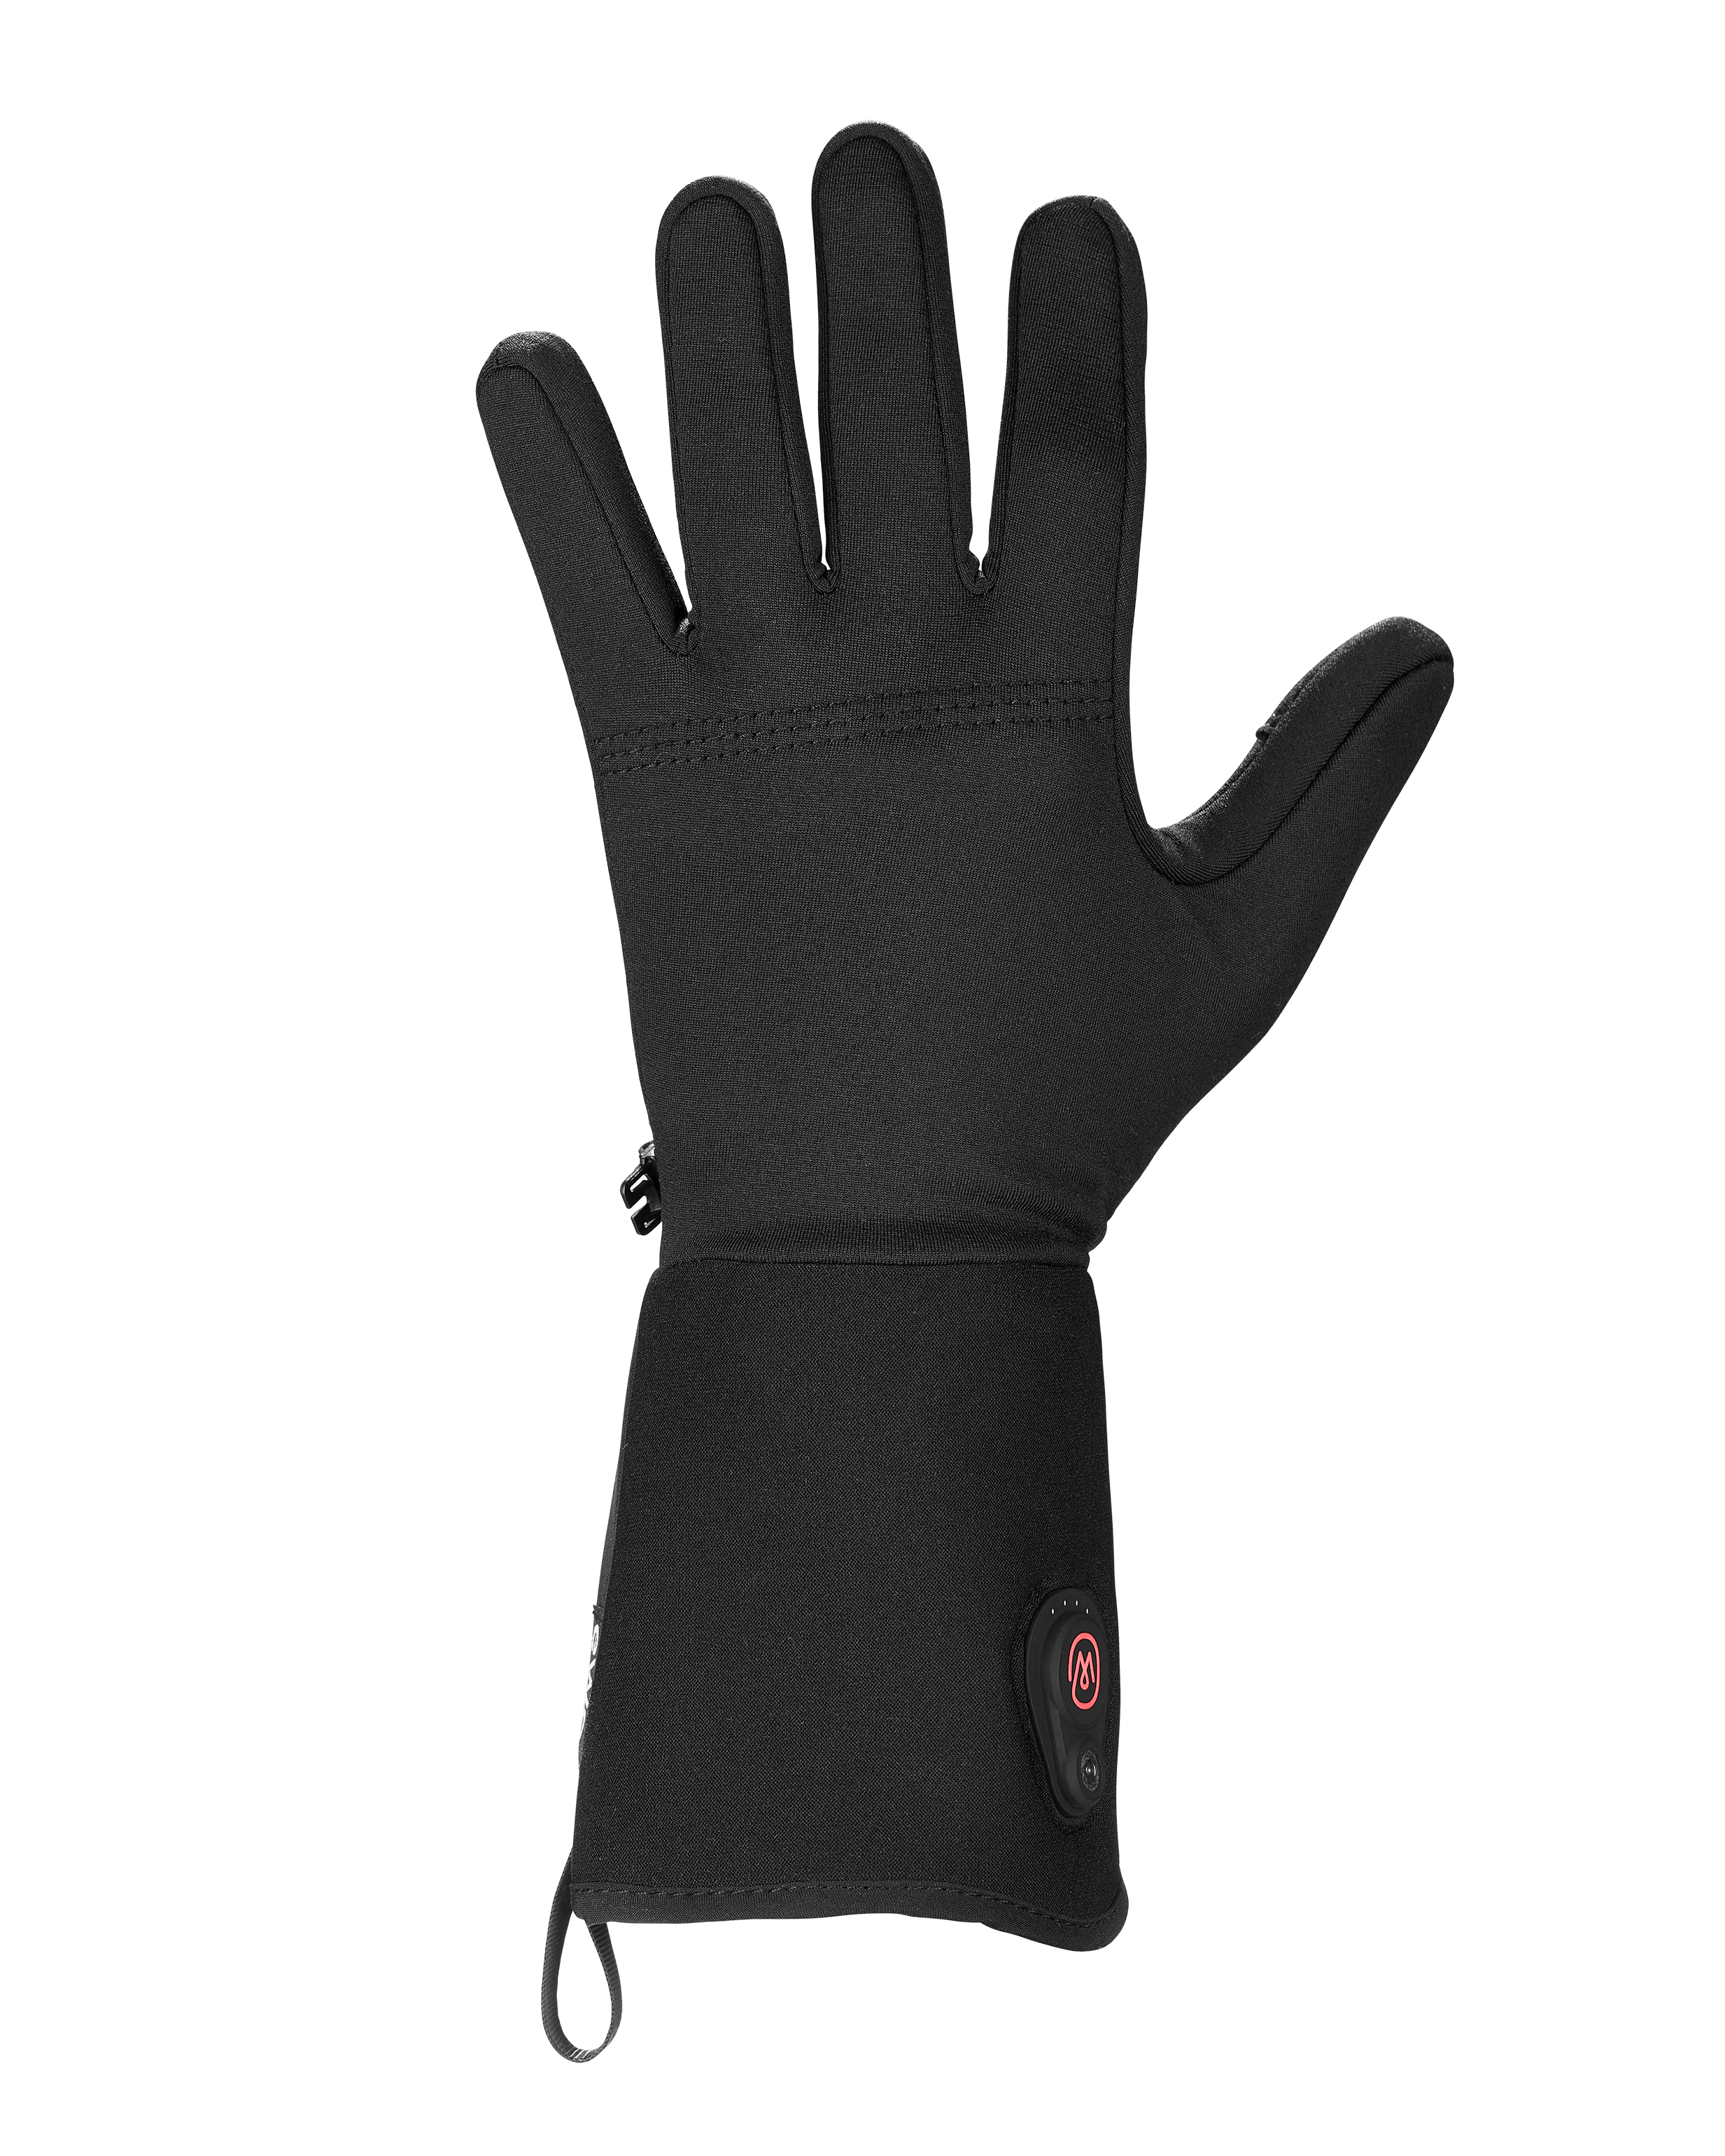 SnapConnect Heated Glove Liners (Open Box)